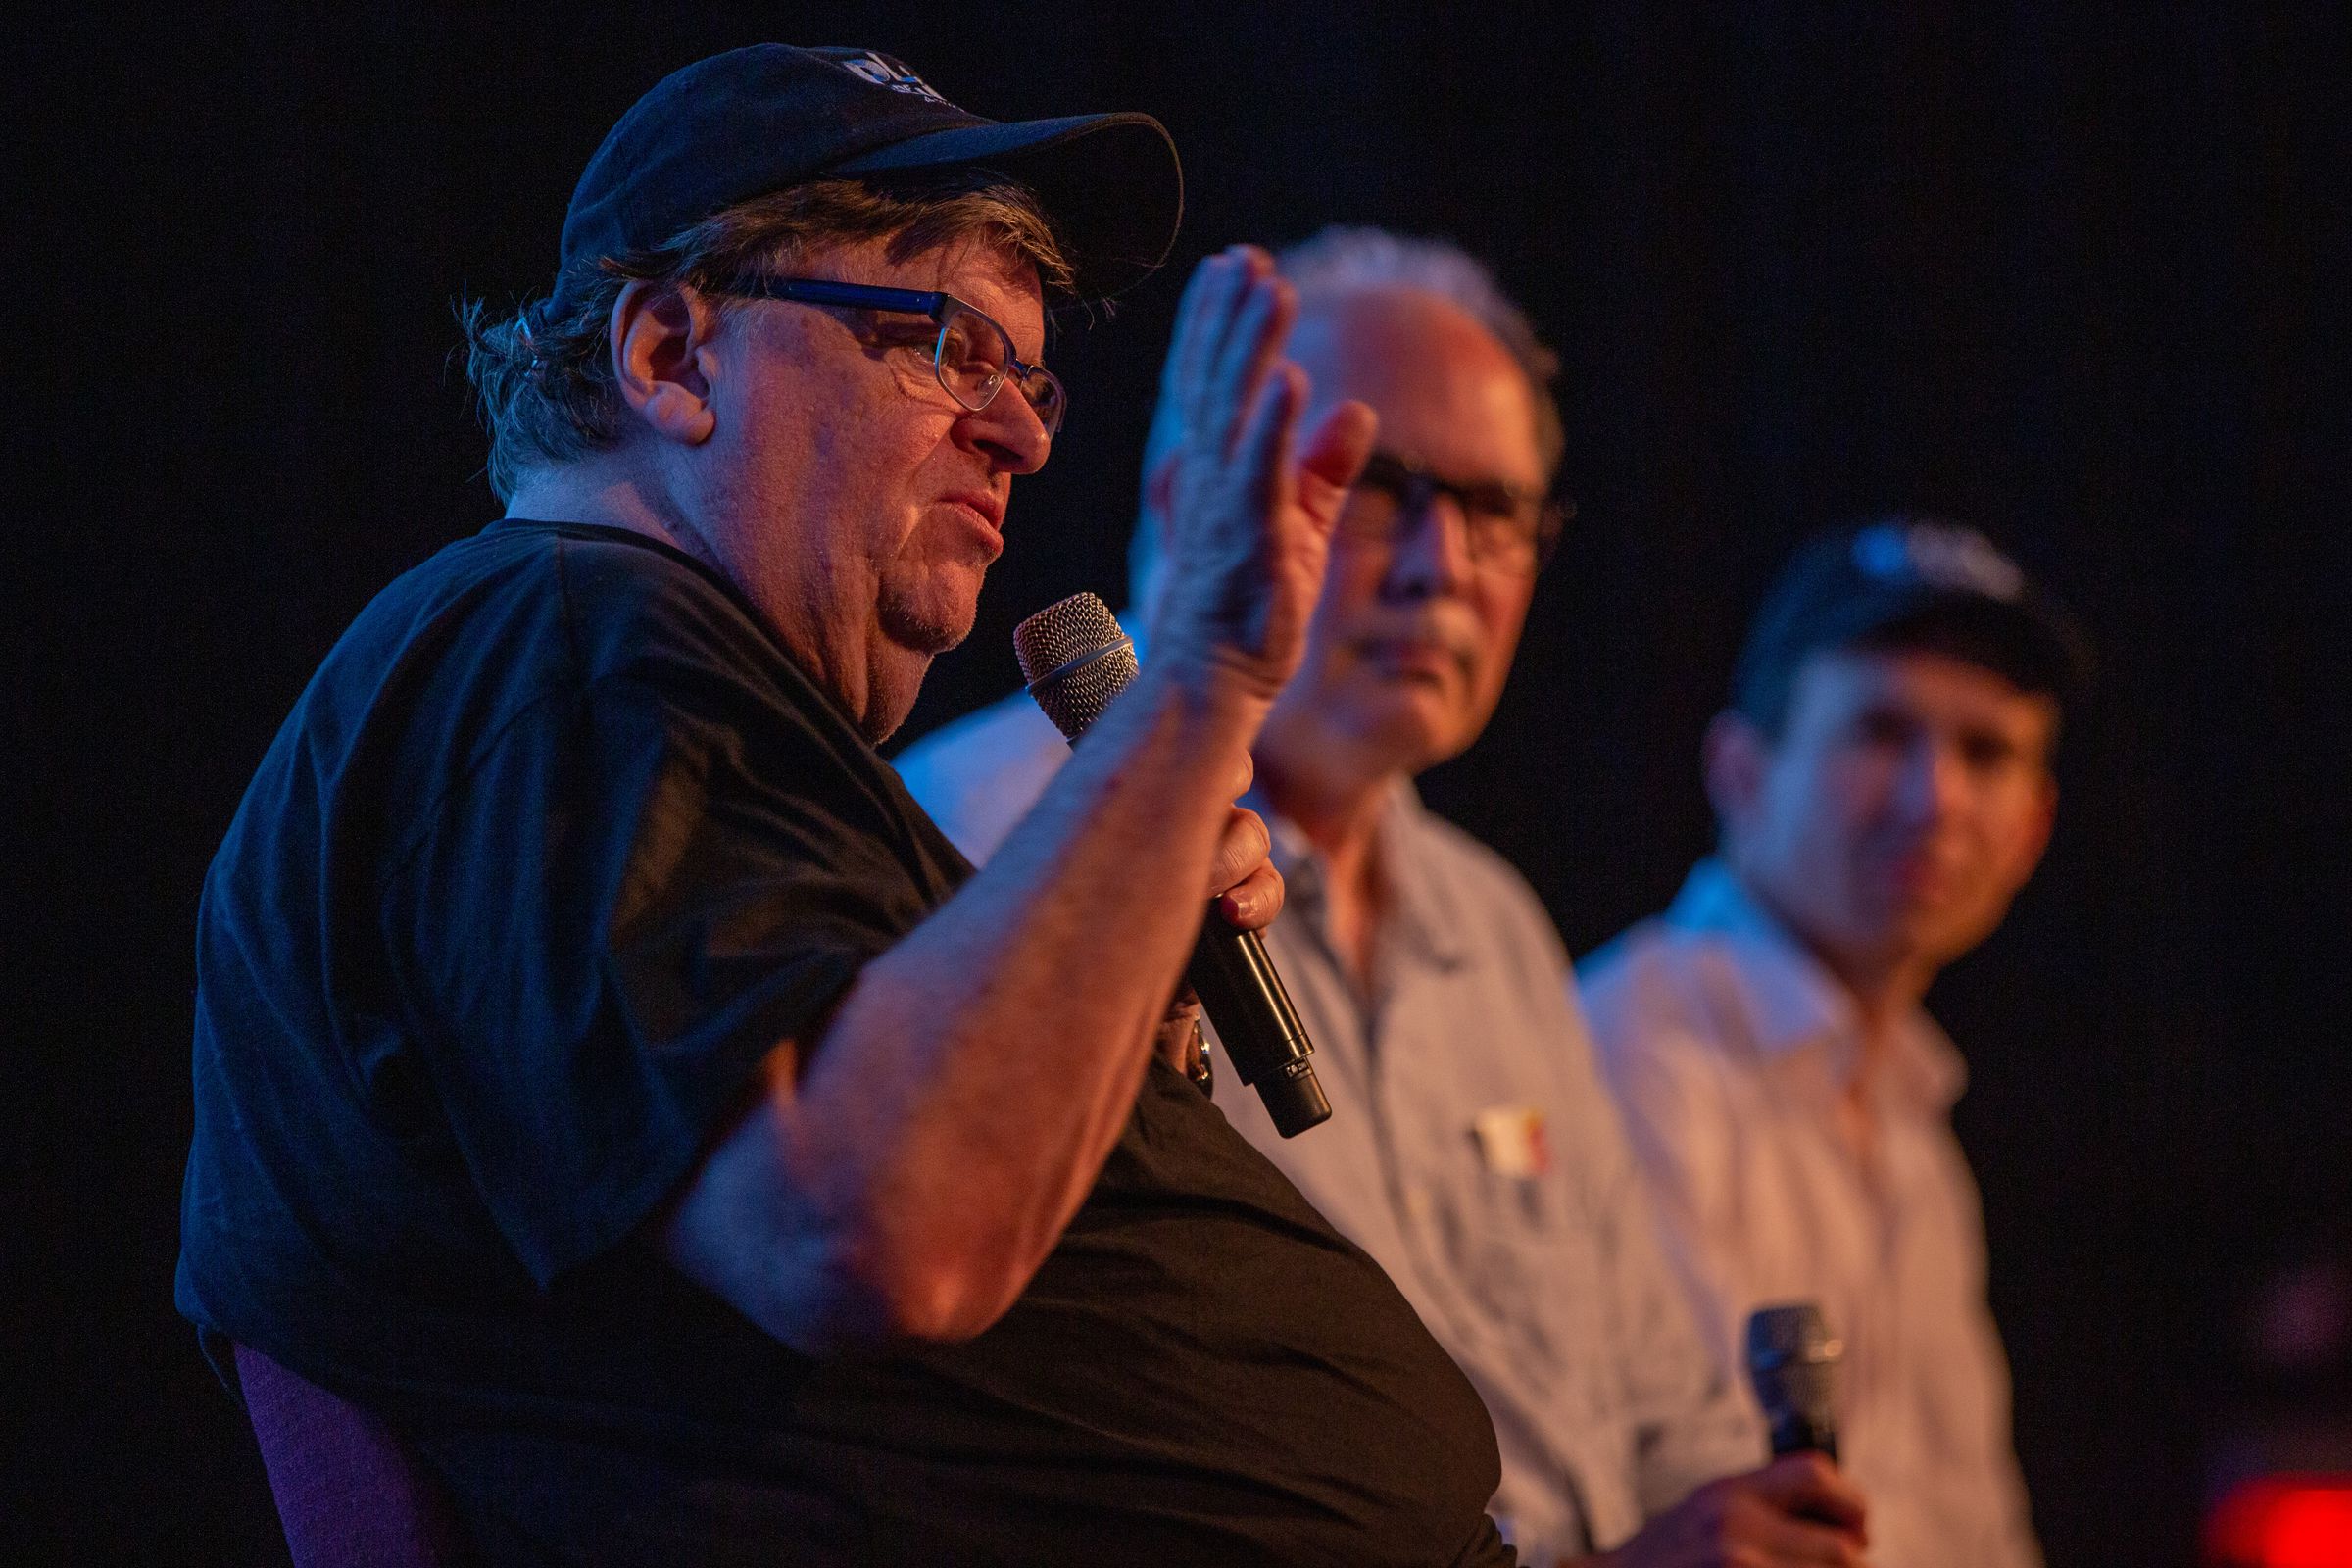 ‘Planet of the Humans’ executive producer Michael Moore with director Jeff Gibbs and producer Ozzie Zehner at the Traverse City Film Festival.